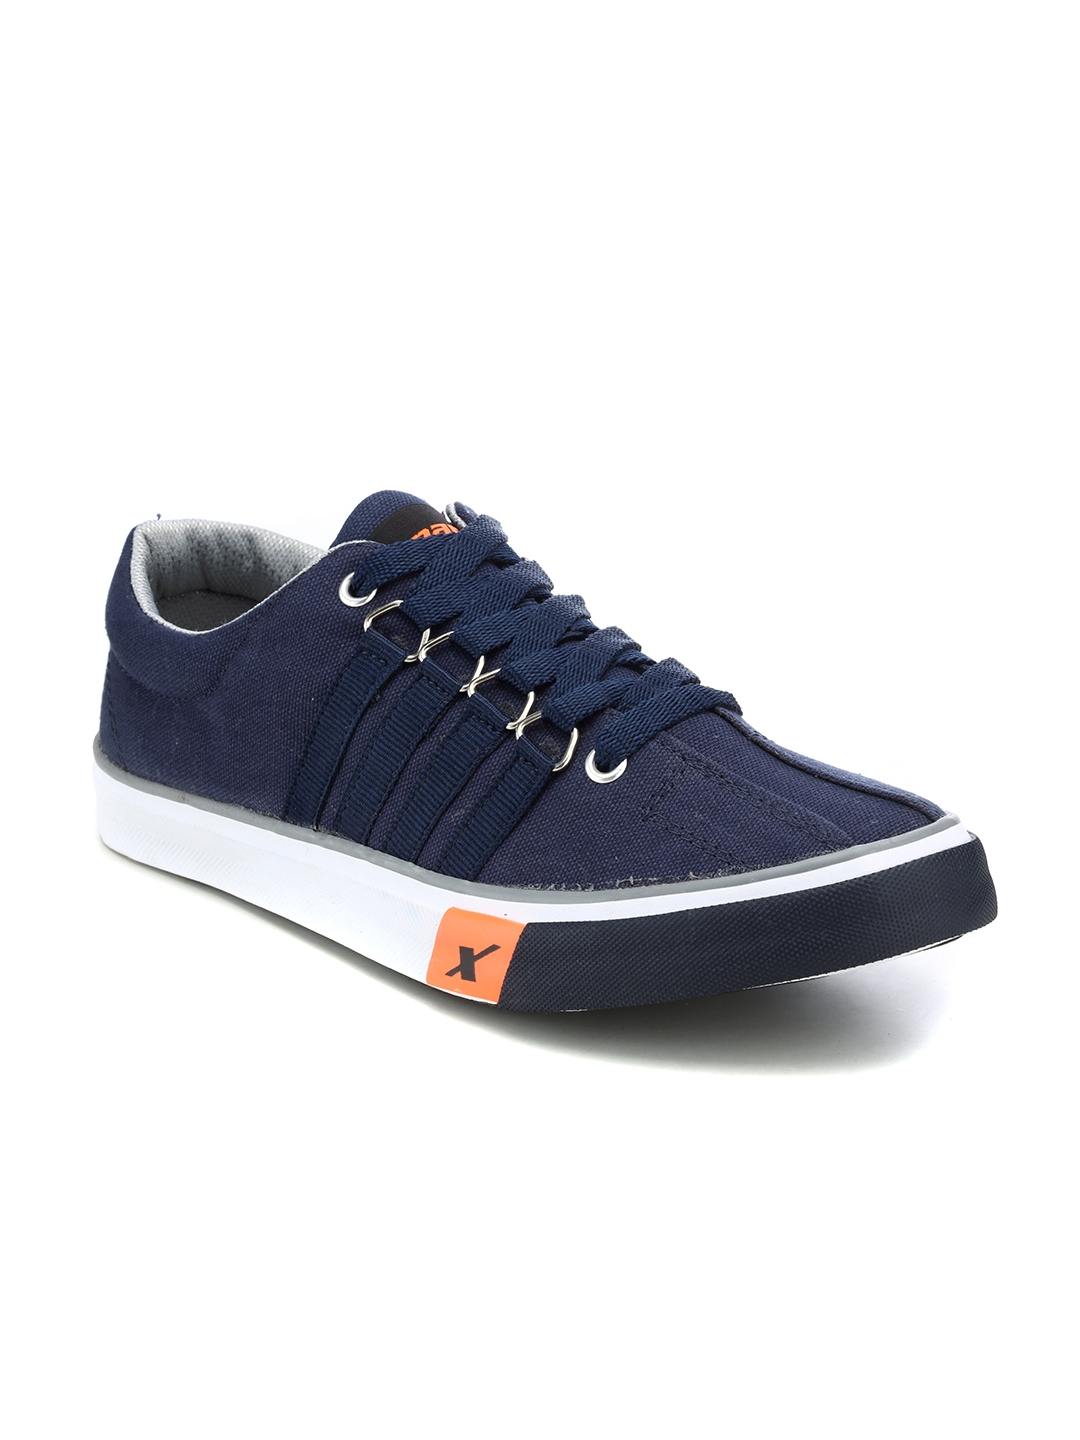 Buy Sparx Men Navy Casual Shoes - Casual Shoes for Men 287521 | Myntra